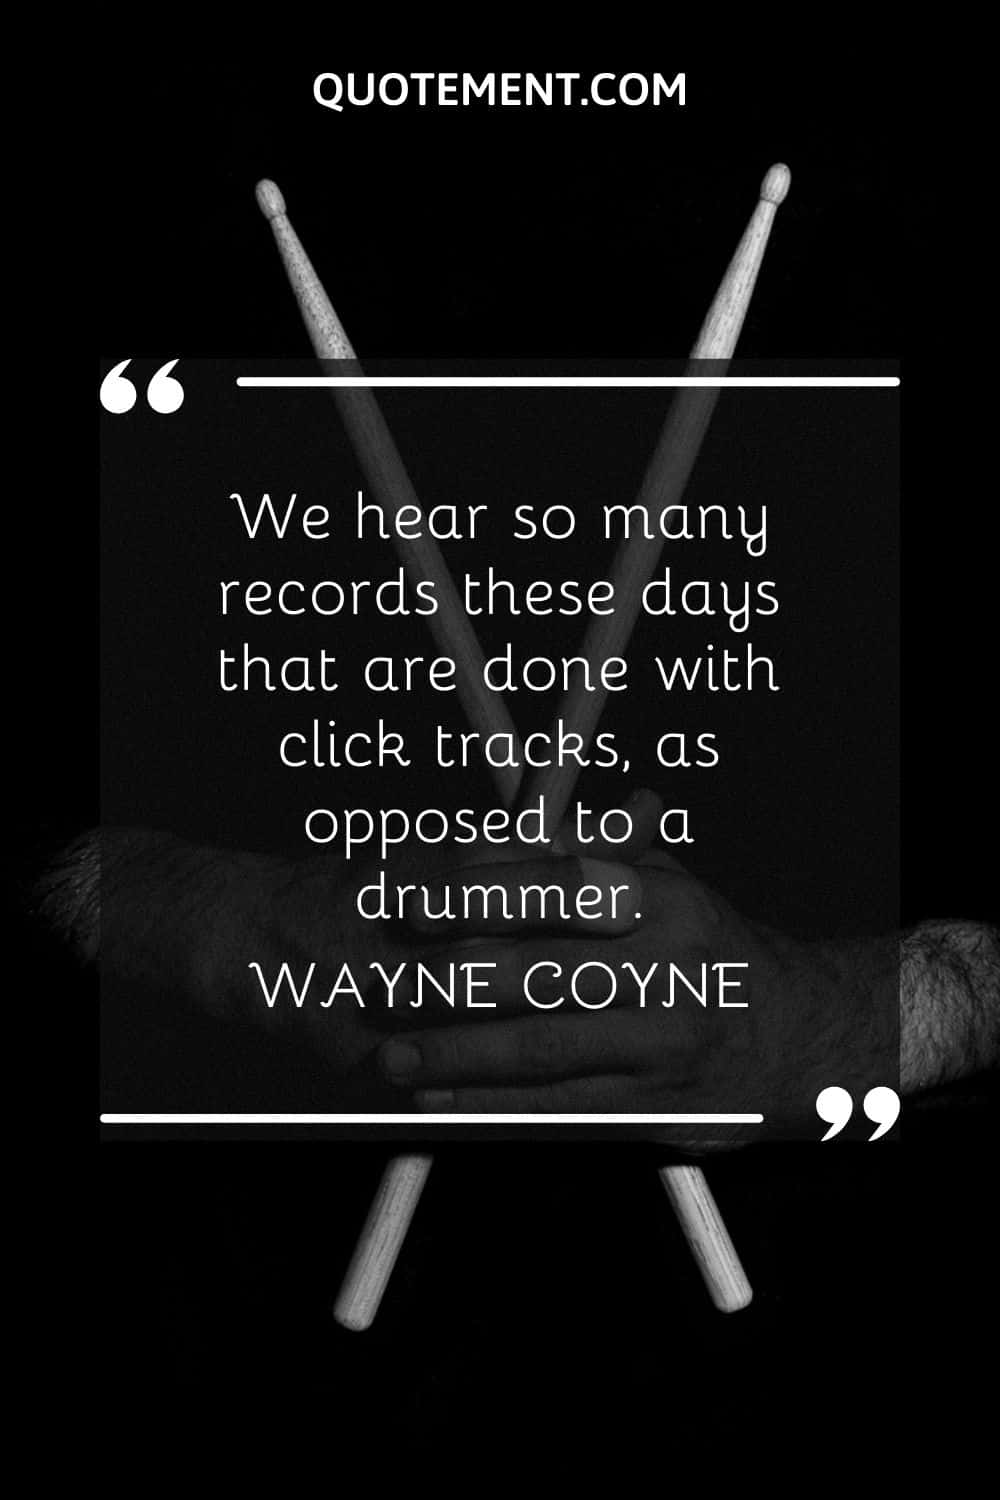 We hear so many records these days that are done with click tracks, as opposed to a drummer